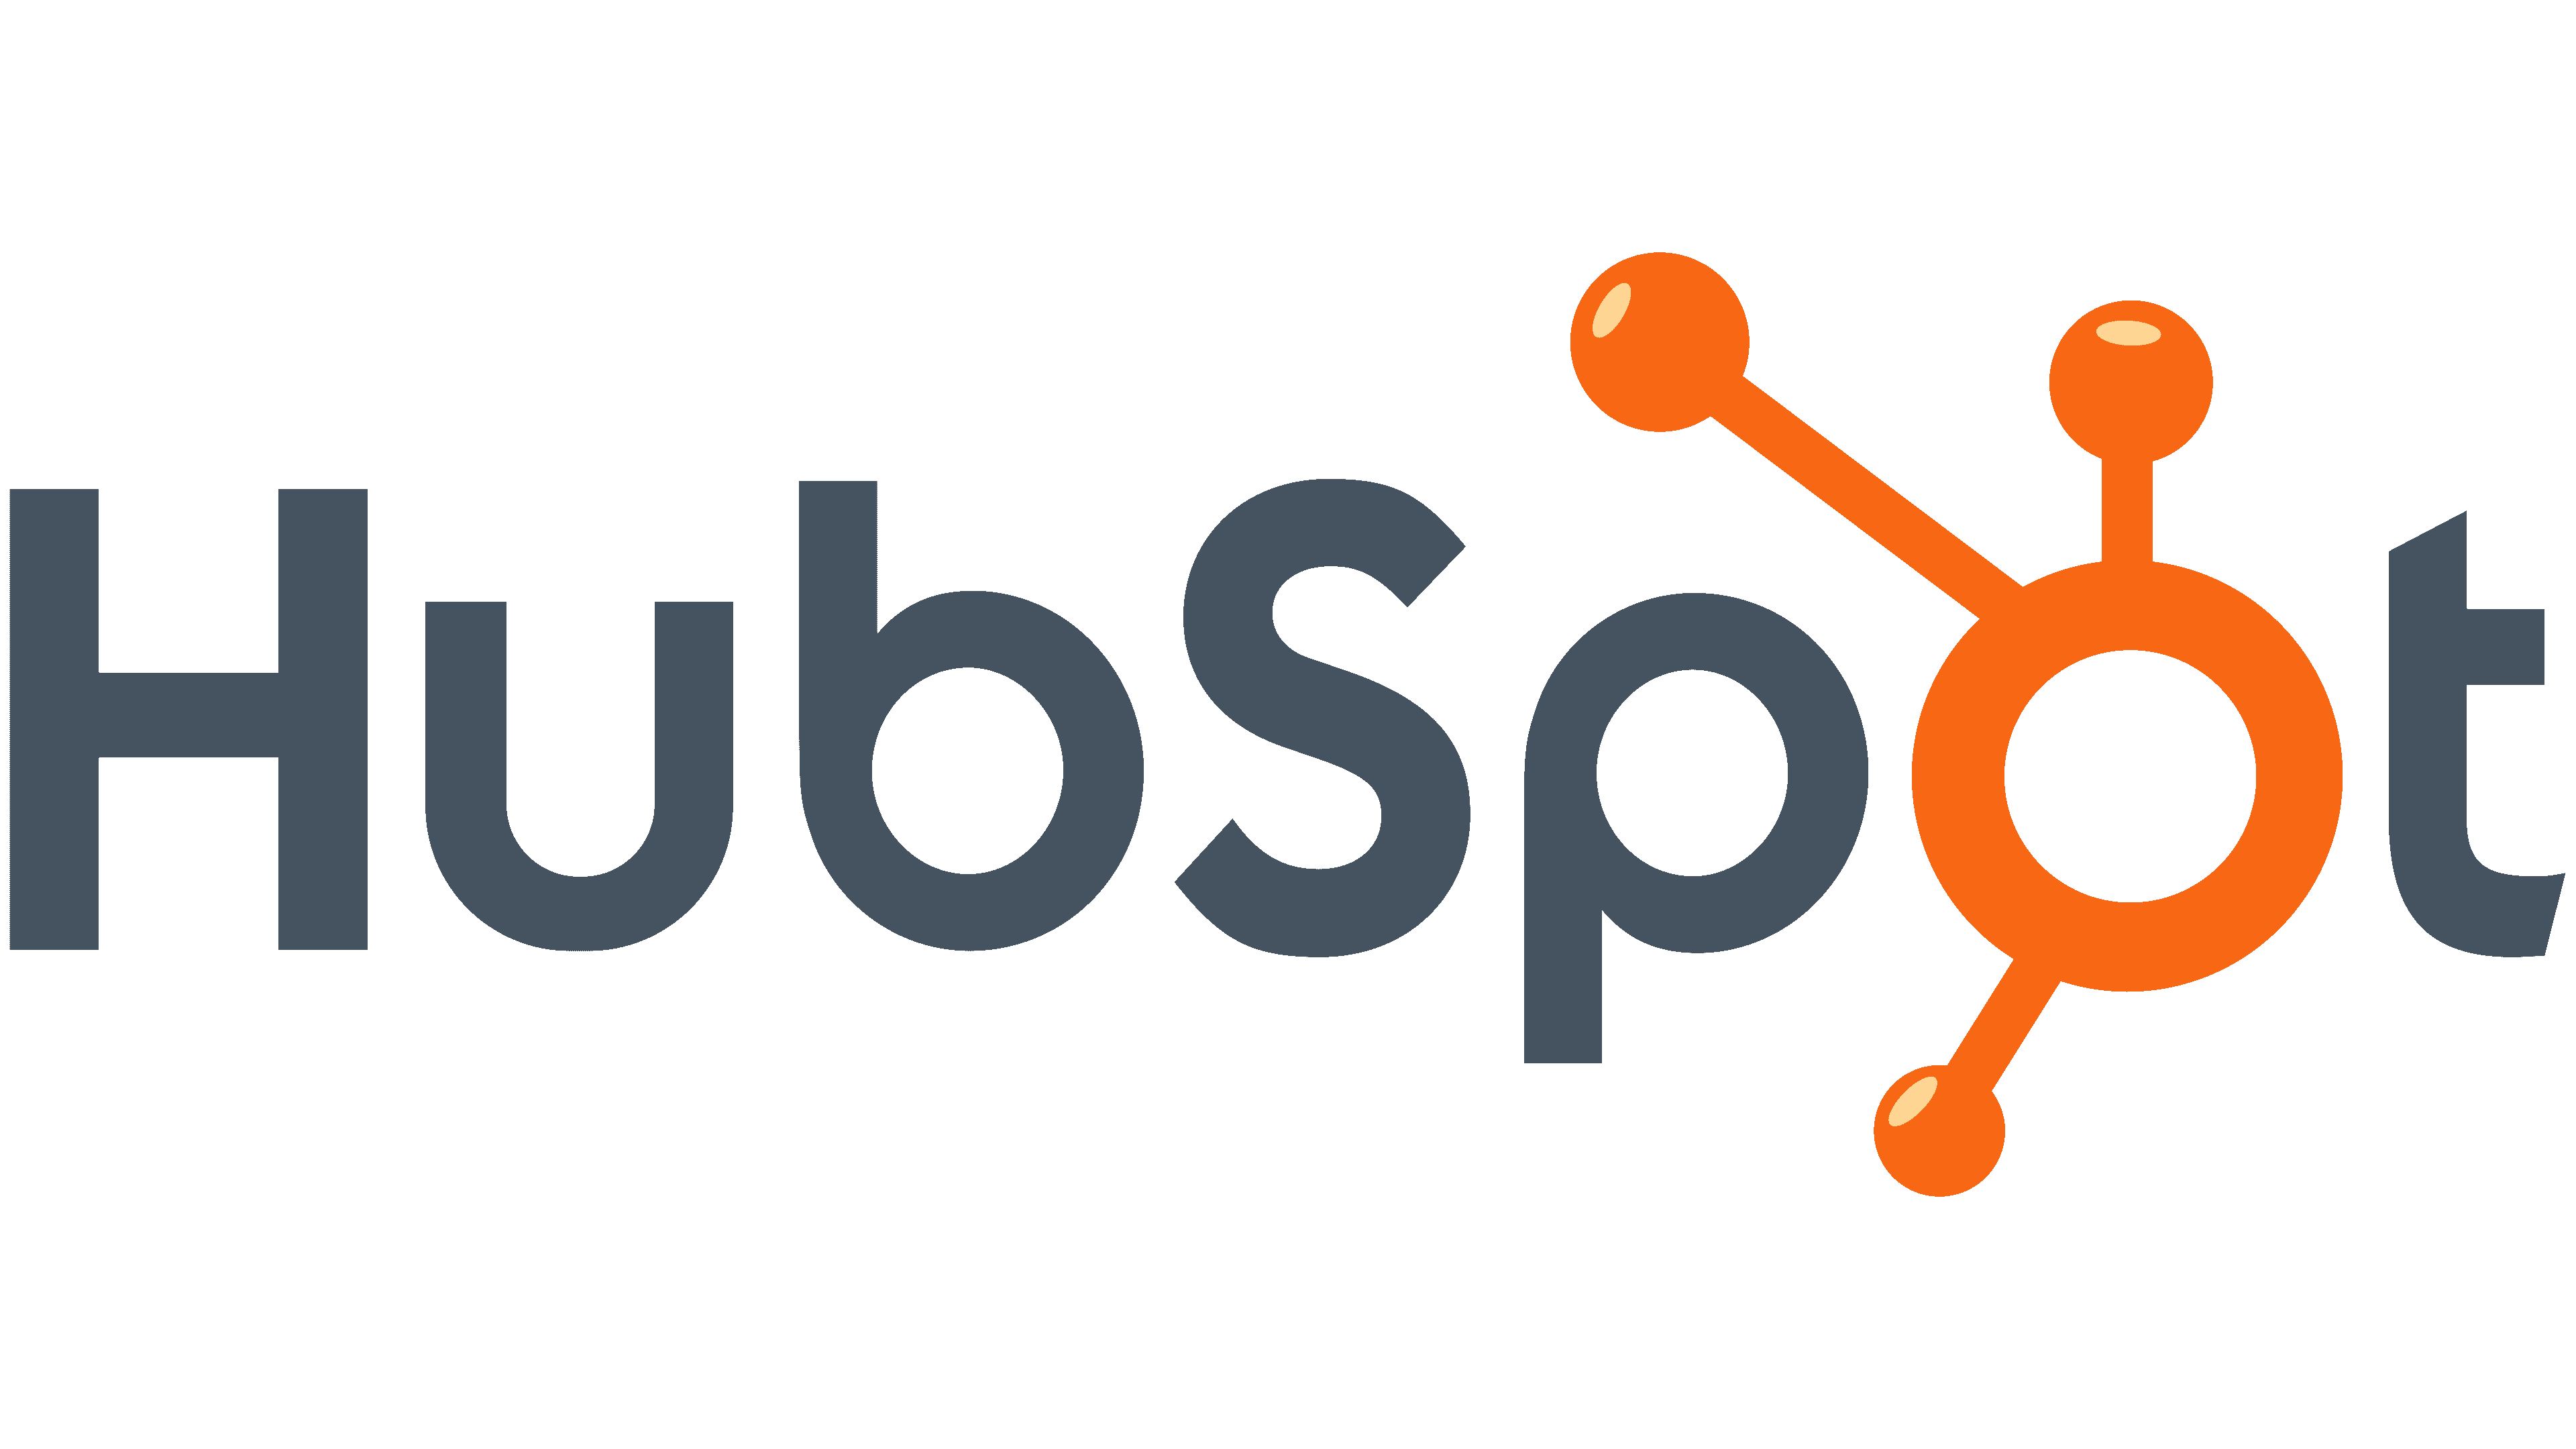 There’s an old Irish saying that a good start is half the work; it’s proven true for HubSpot when setting up its international base.